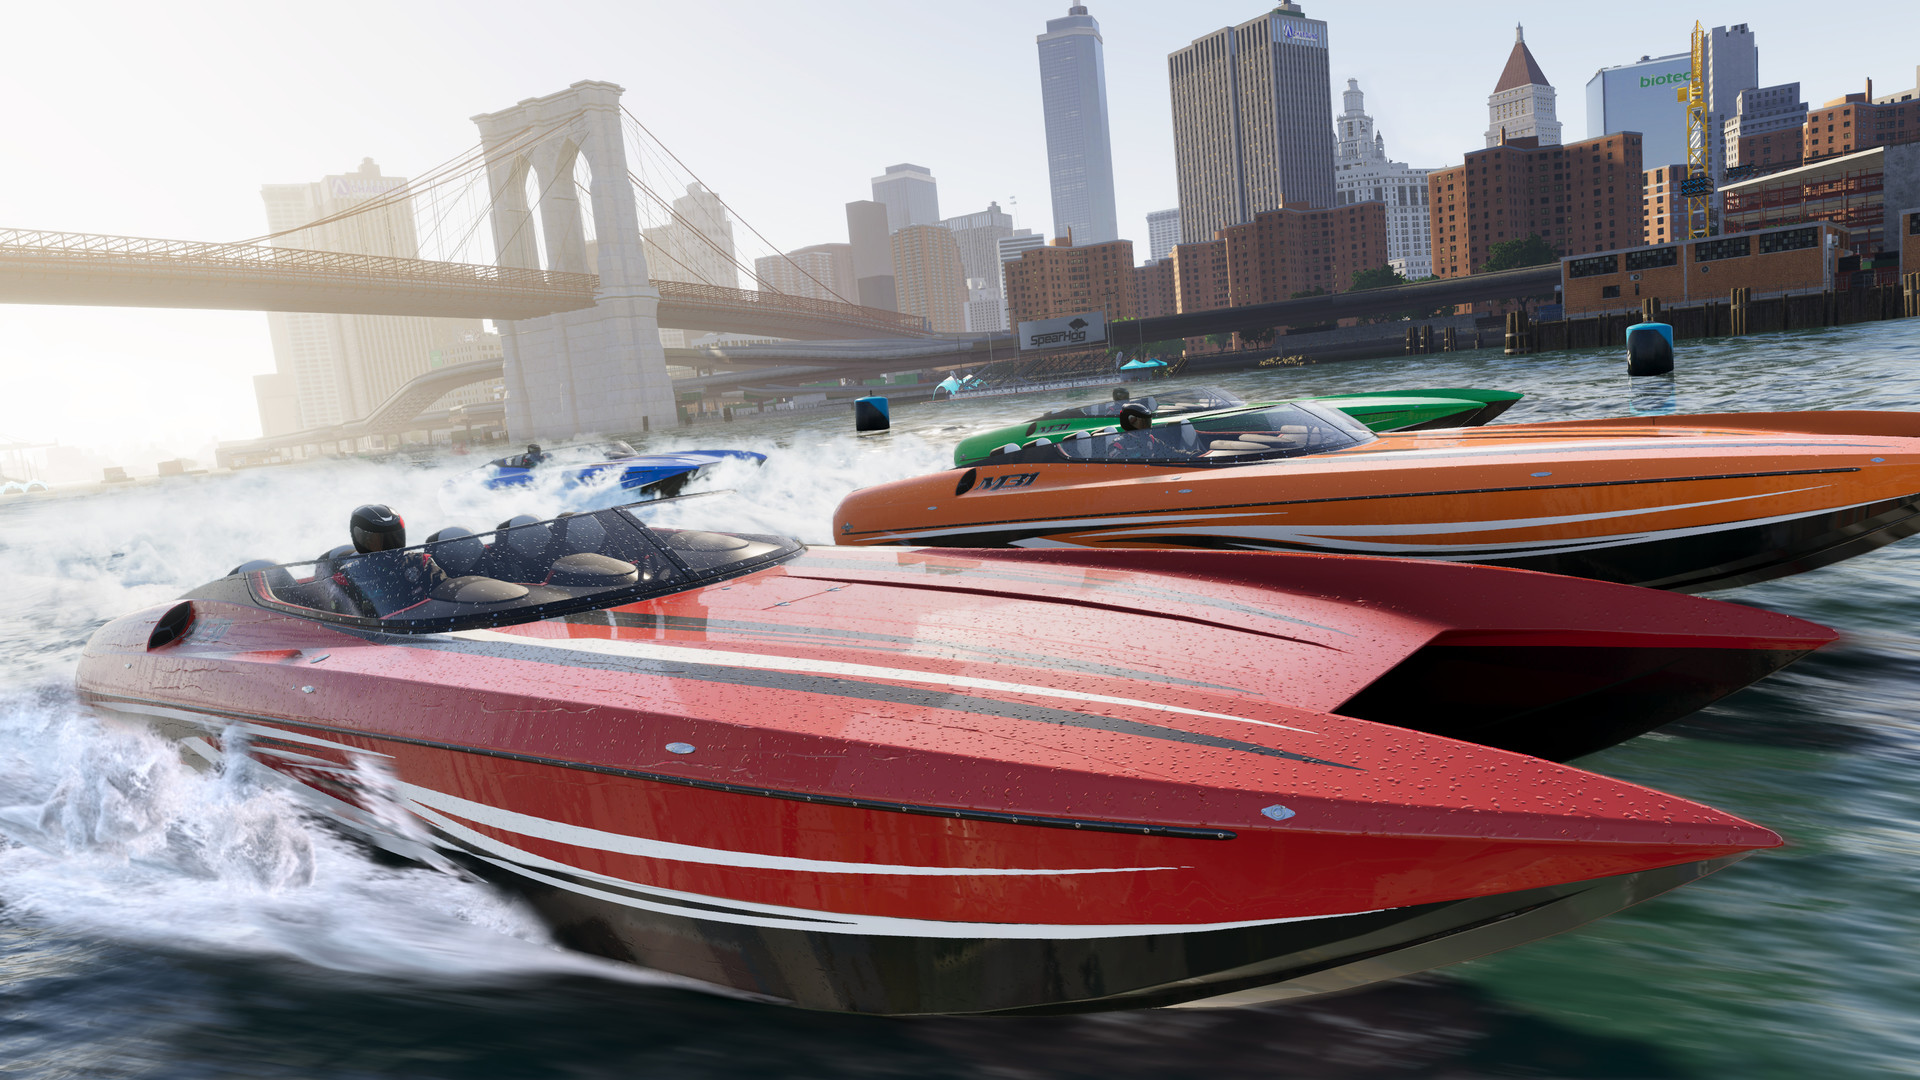 The Crew 2 Deluxe Edition  Download and Buy Today - Epic